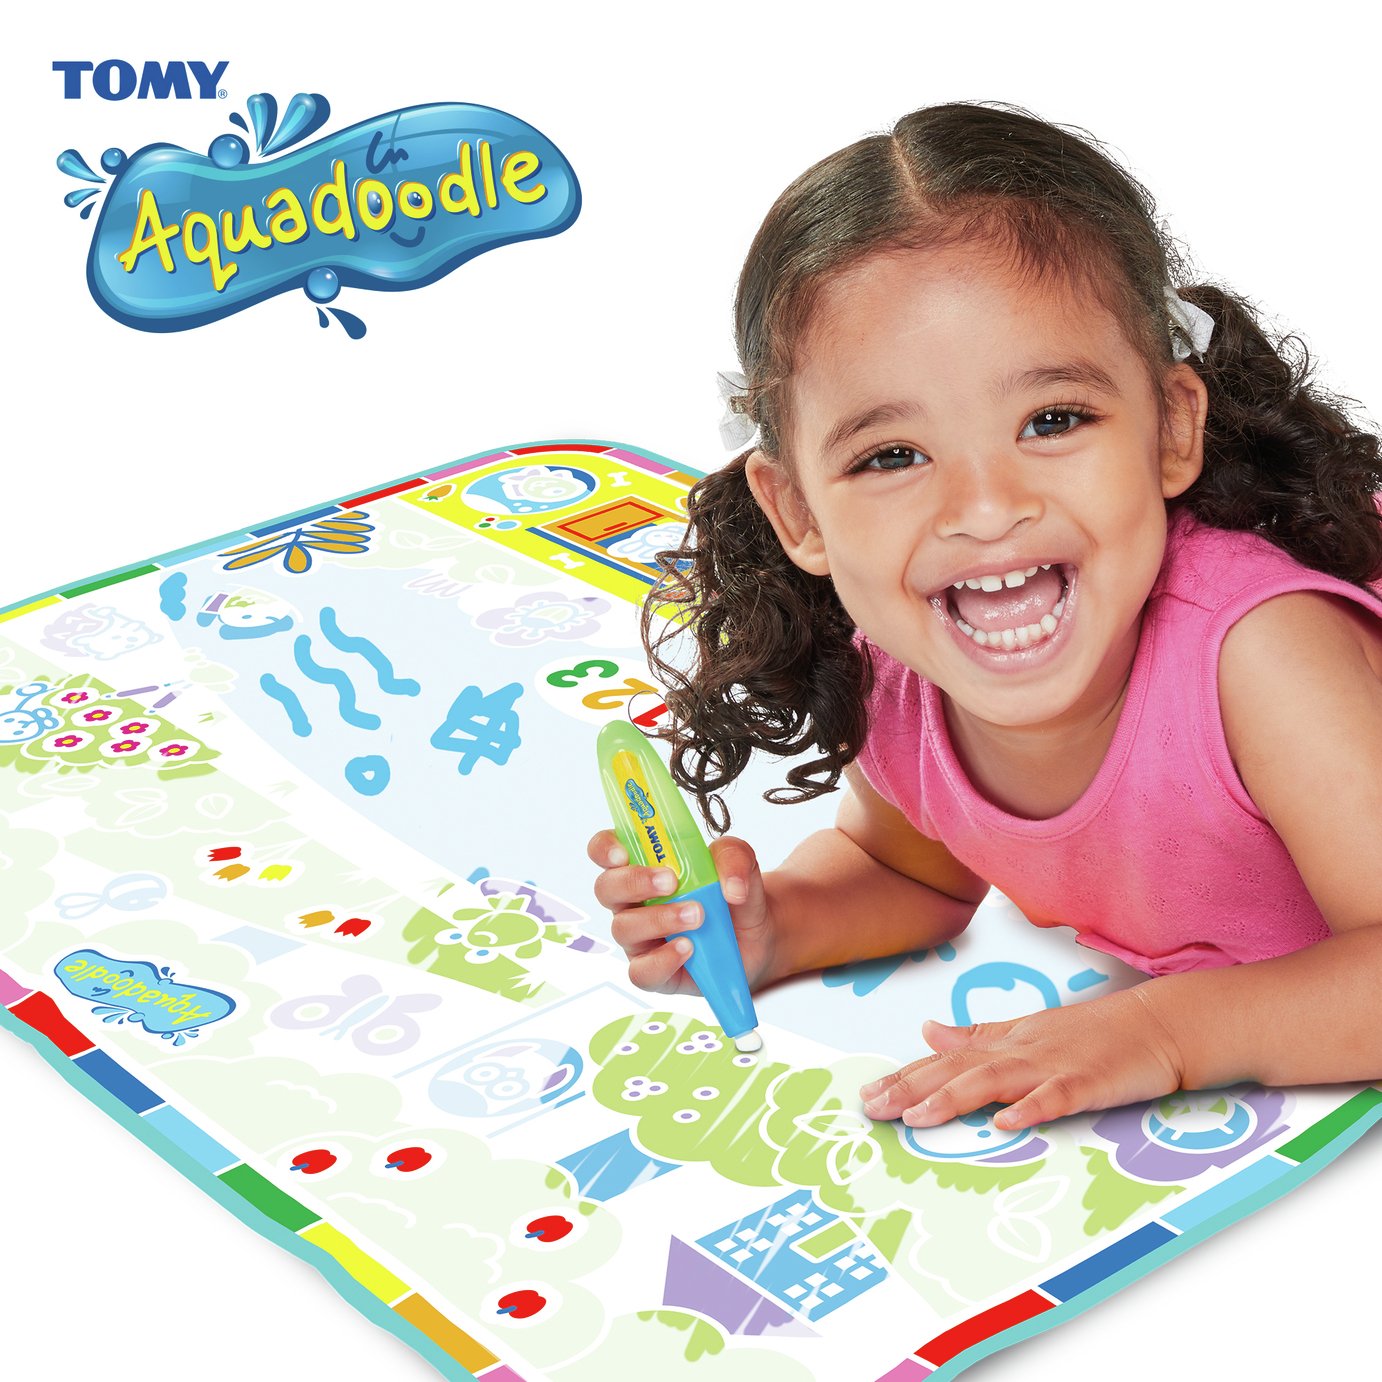 Tomy My 1st Discovery Aquadoodle Review